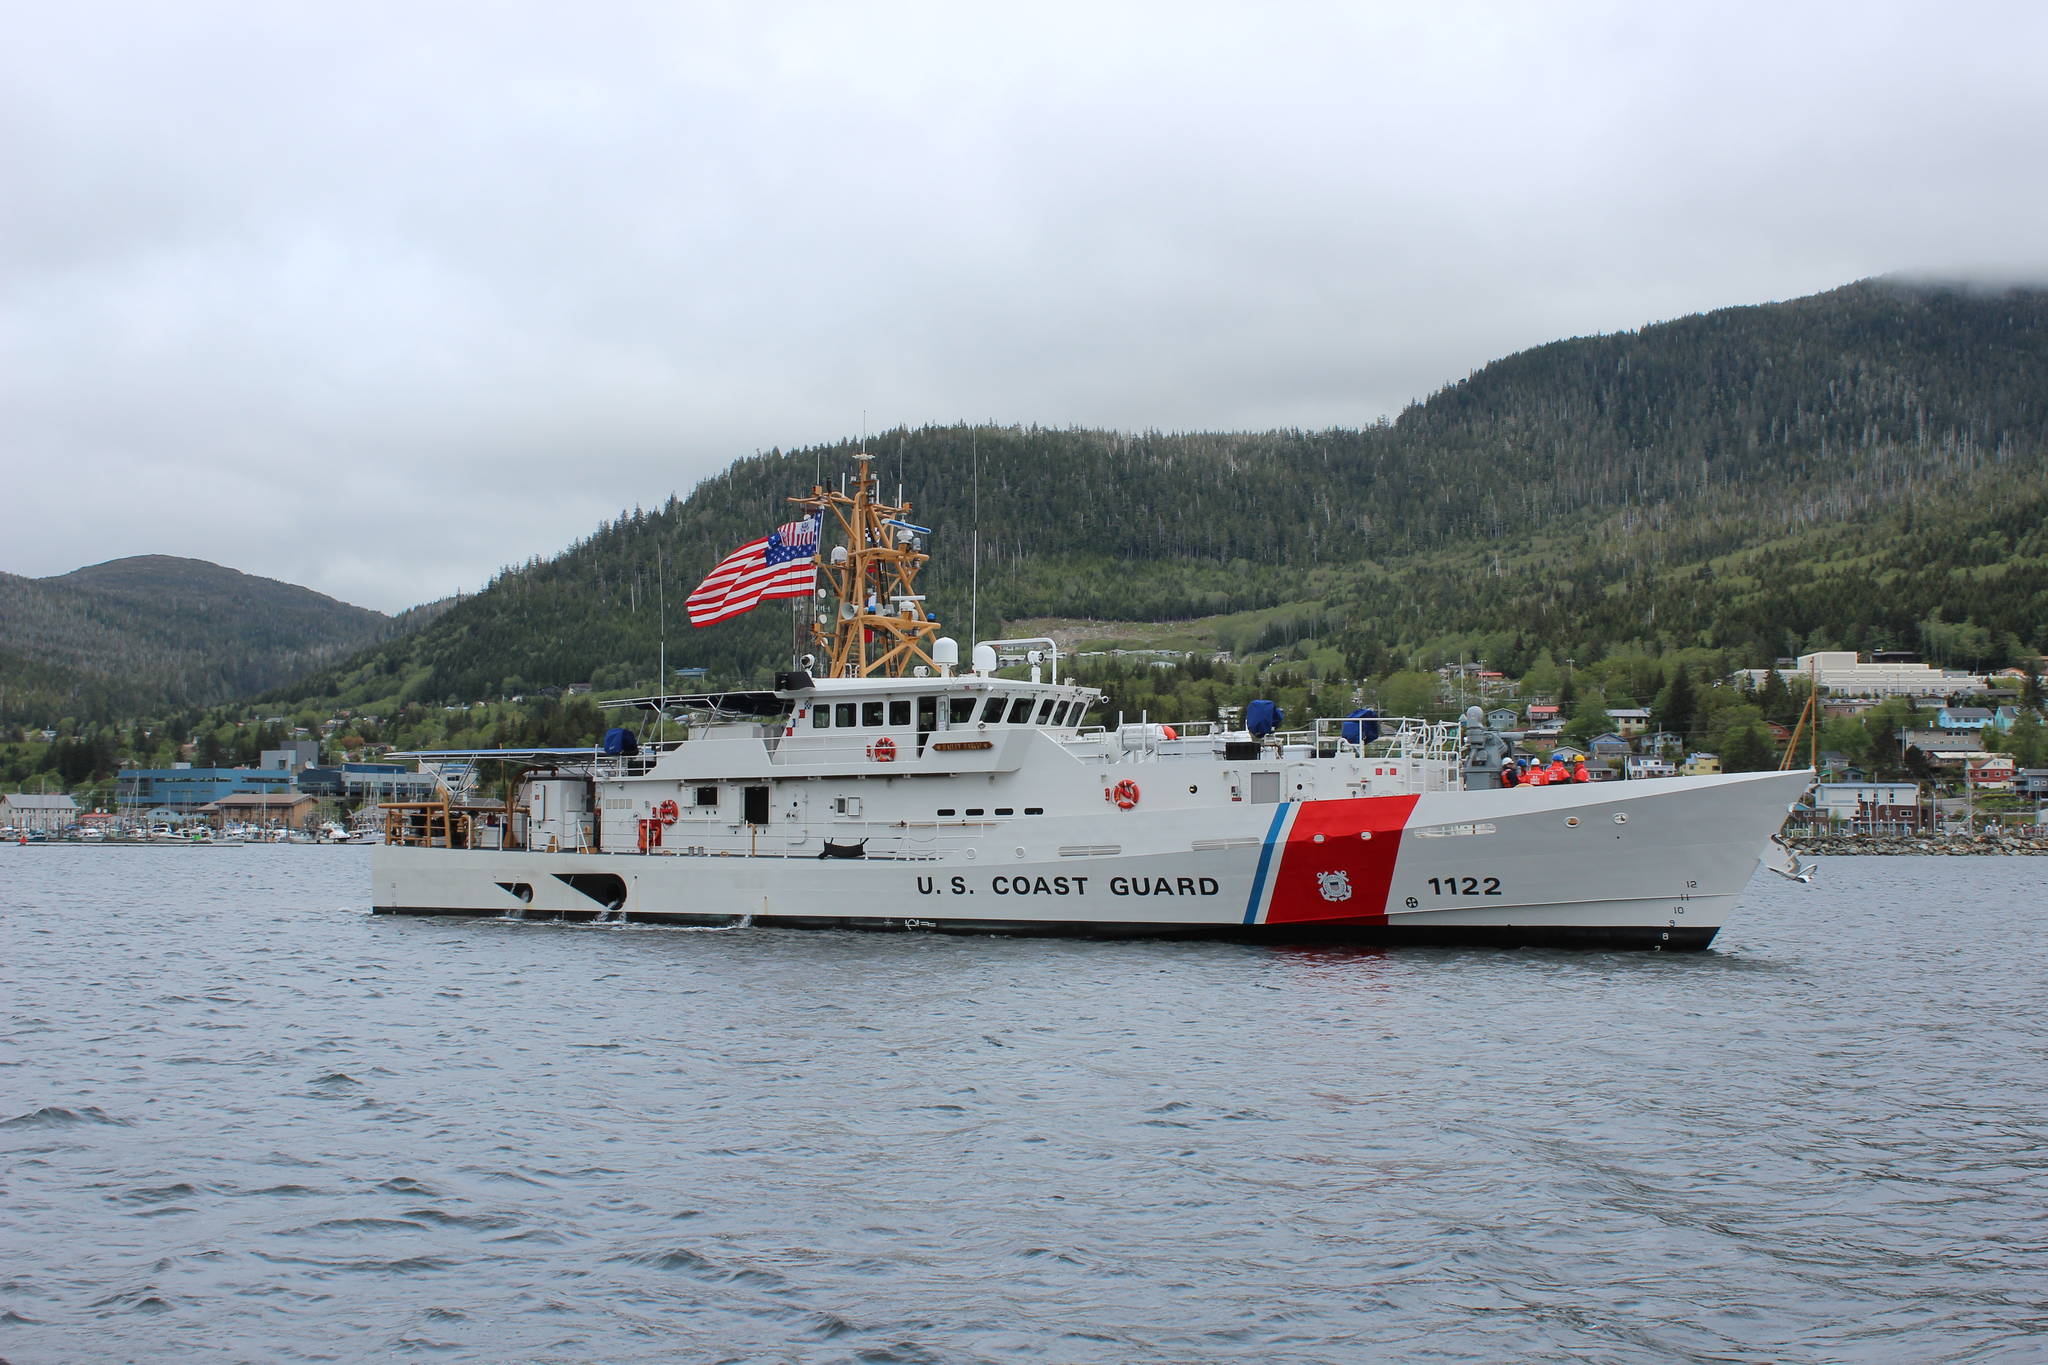 The CGC Bailey Barco pulls into its home port of Ketchikan on May 12. The vessel, just the second Fast Response Cutter to be stationed in Alaska, will be commissioned in Juneau on June 14. (Photo courtesy of the U.S. Coast Guard)